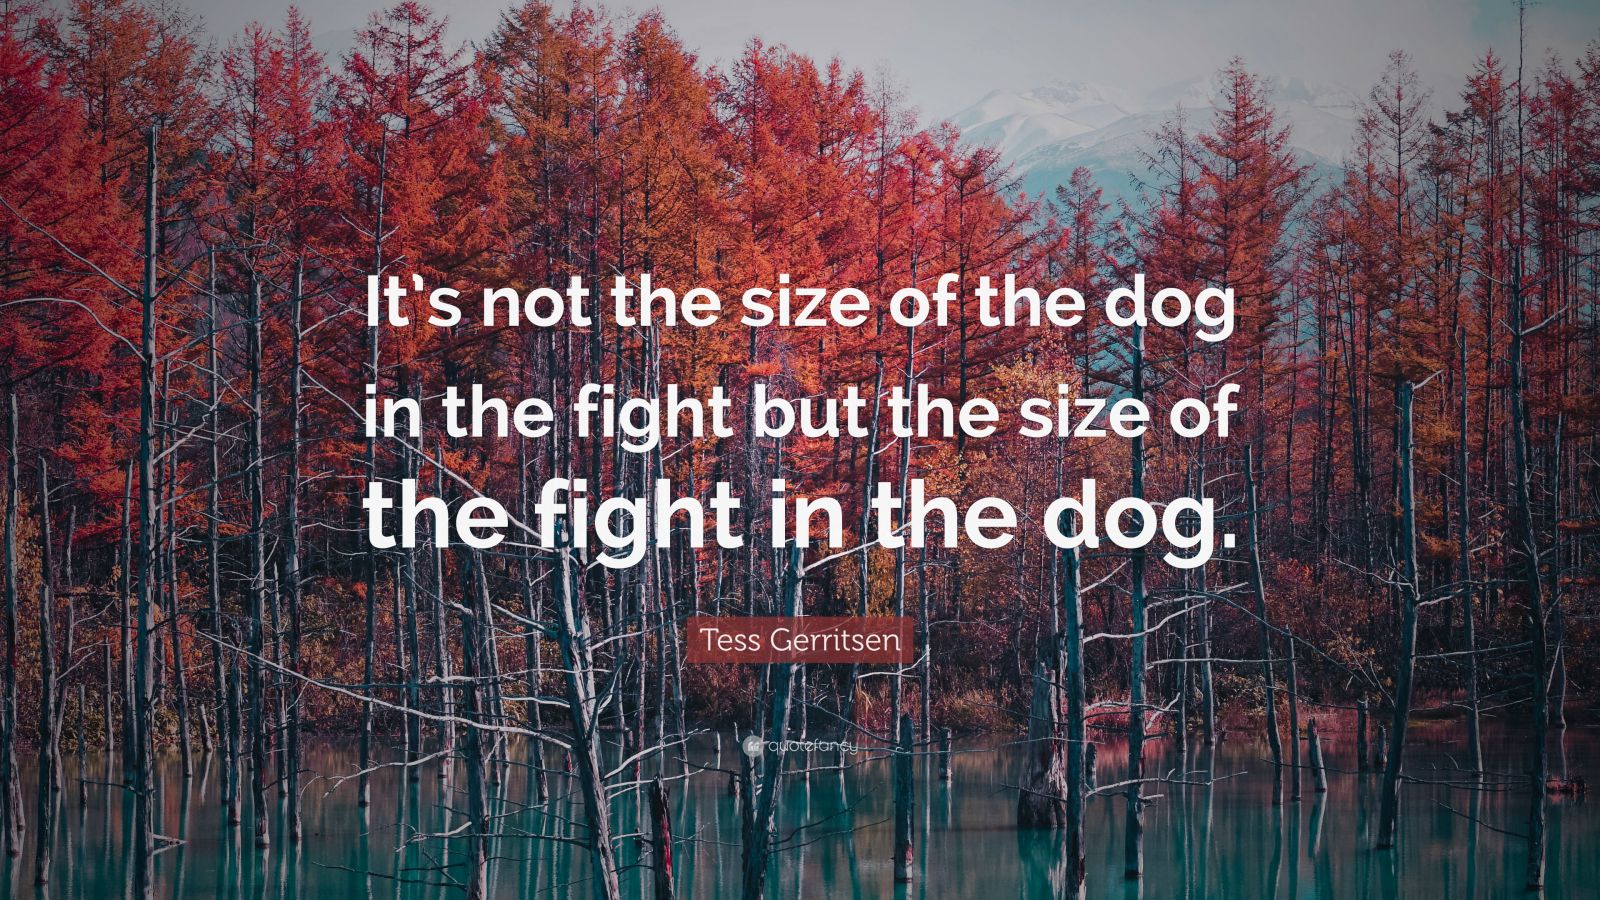 Tess Gerritsen Quote: “It’s not the size of the dog in the fight but ...